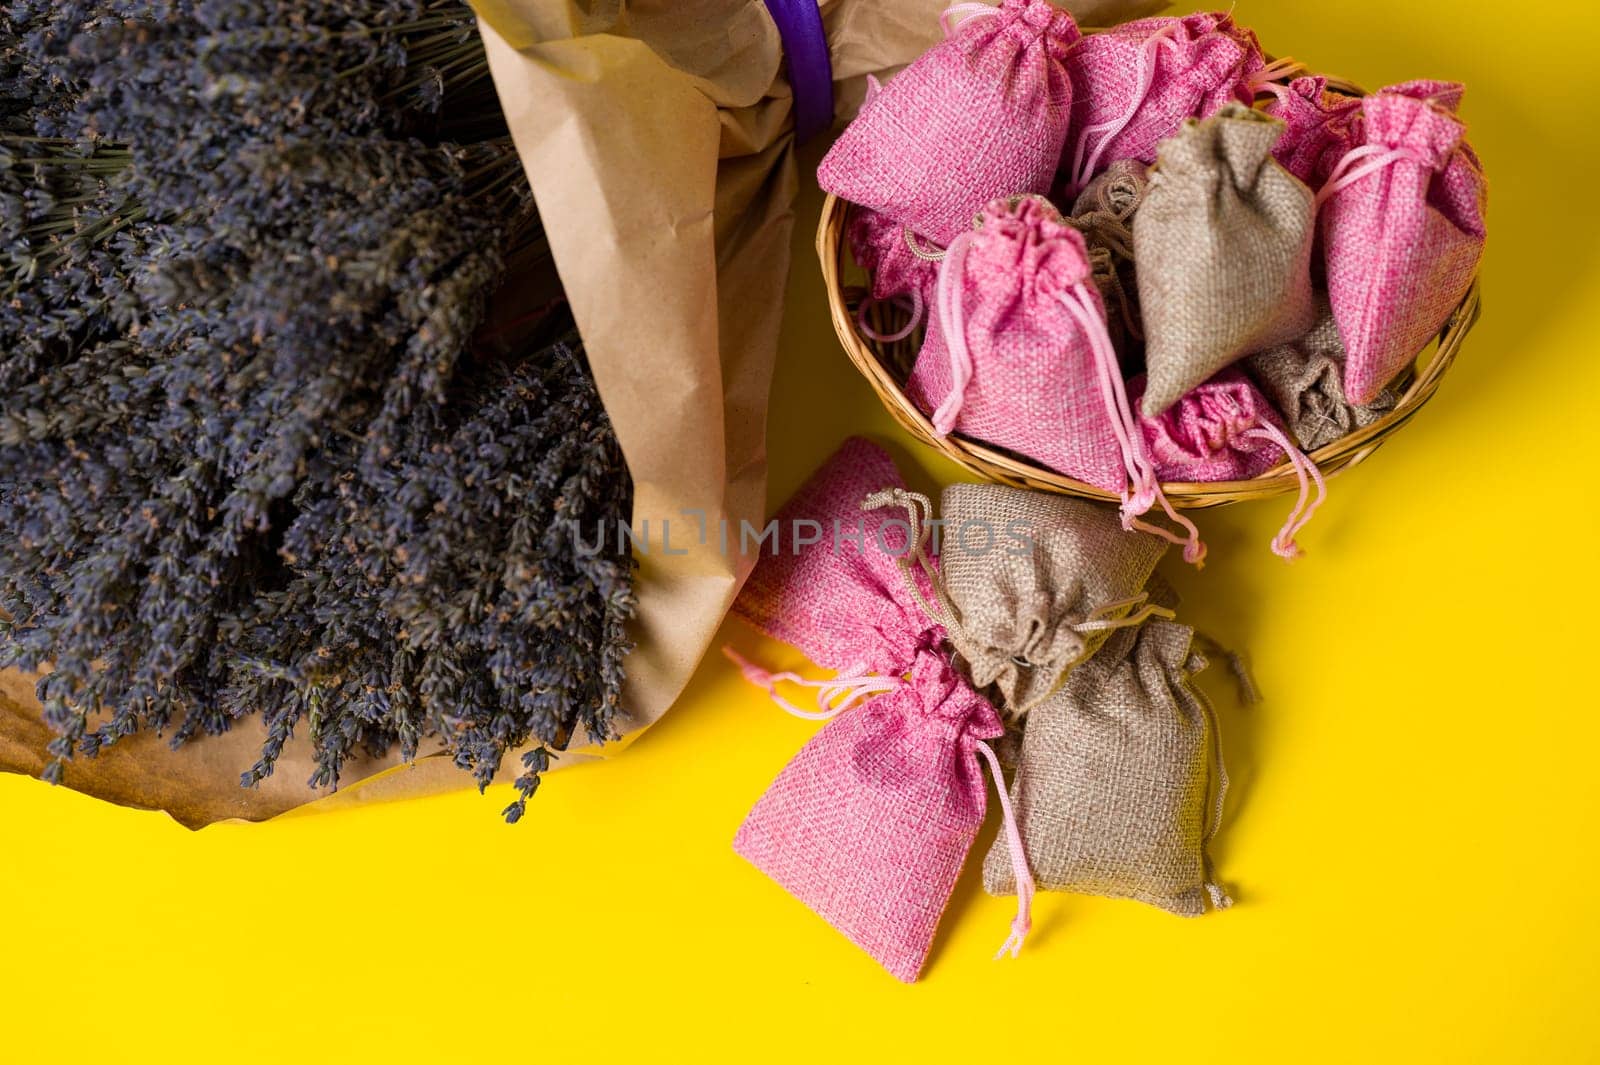 Dried lavender flowers and sachets on a yellow background. by Niko_Cingaryuk